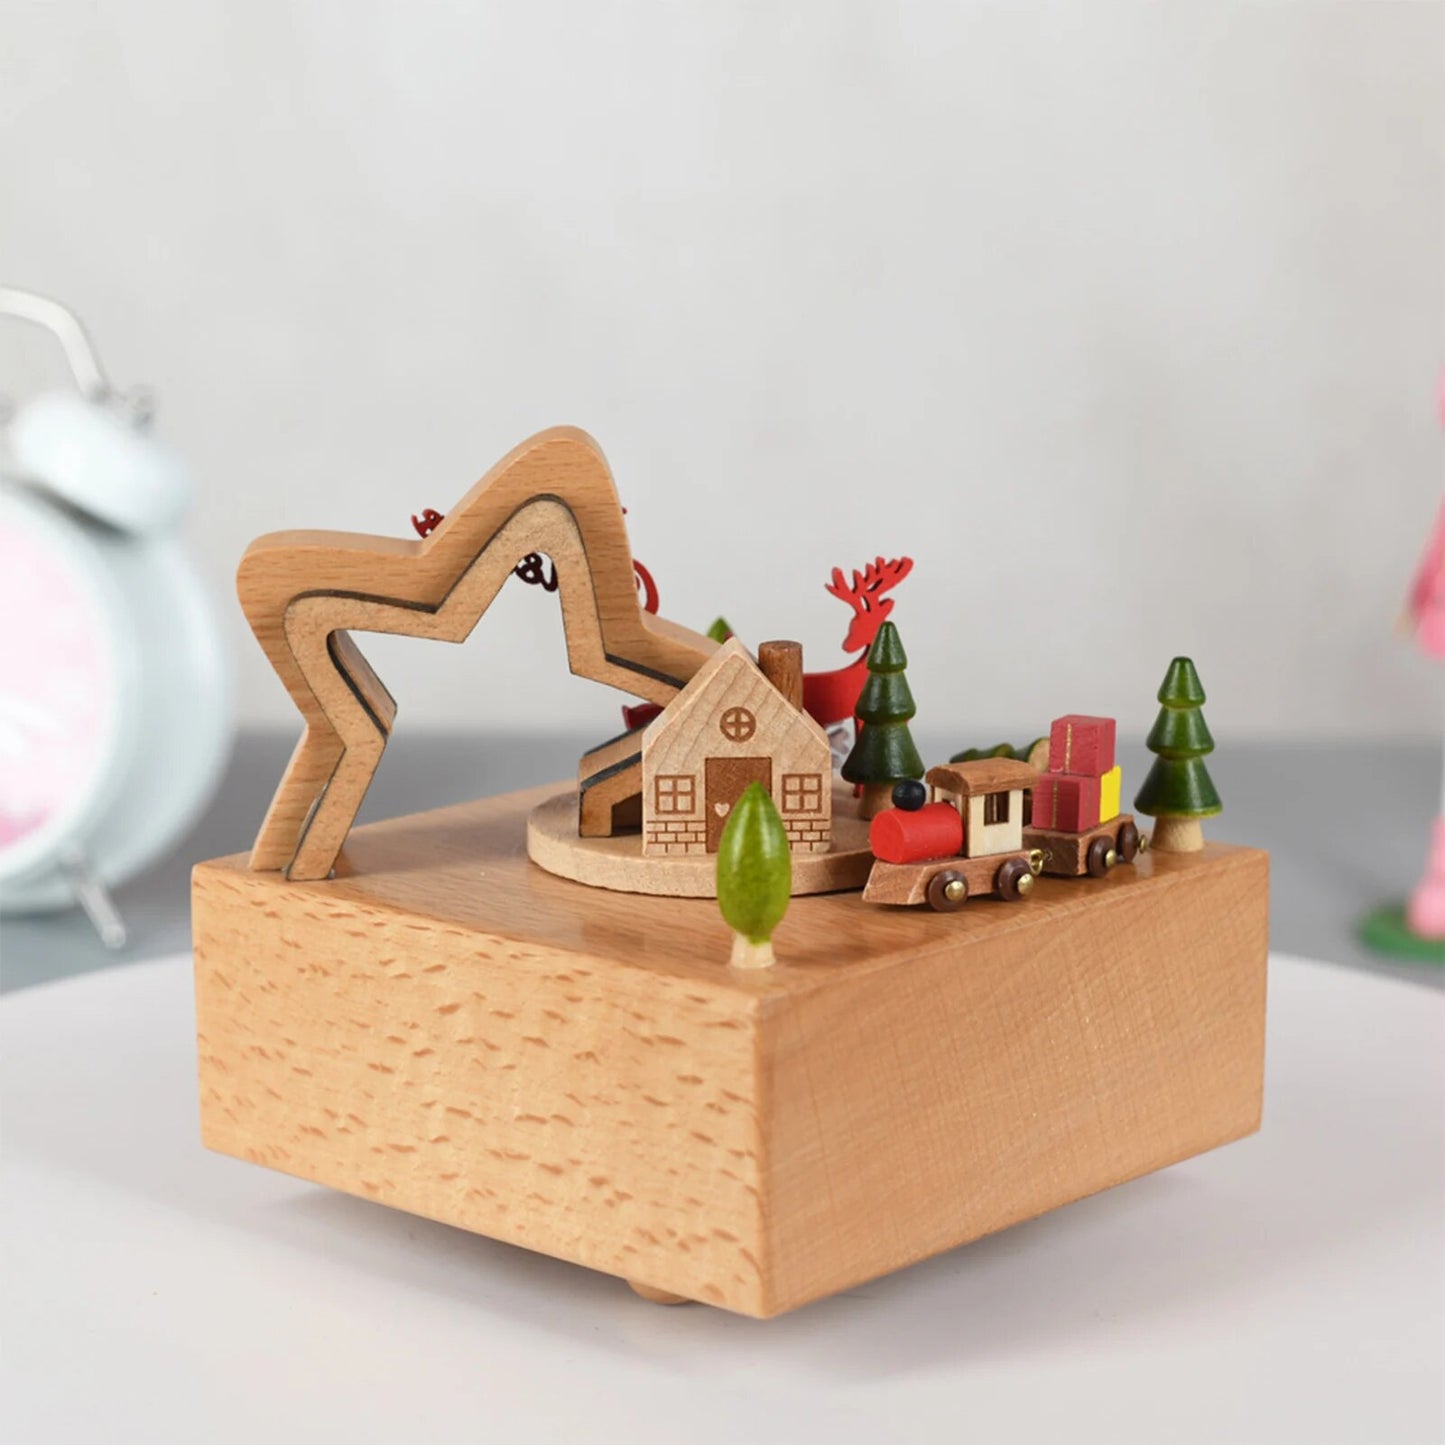 Carousel Music Box Wooden Christmas Ornament Rotary Train Musical Box Home Decoration Accessories For Birthday Gifts Valentine'